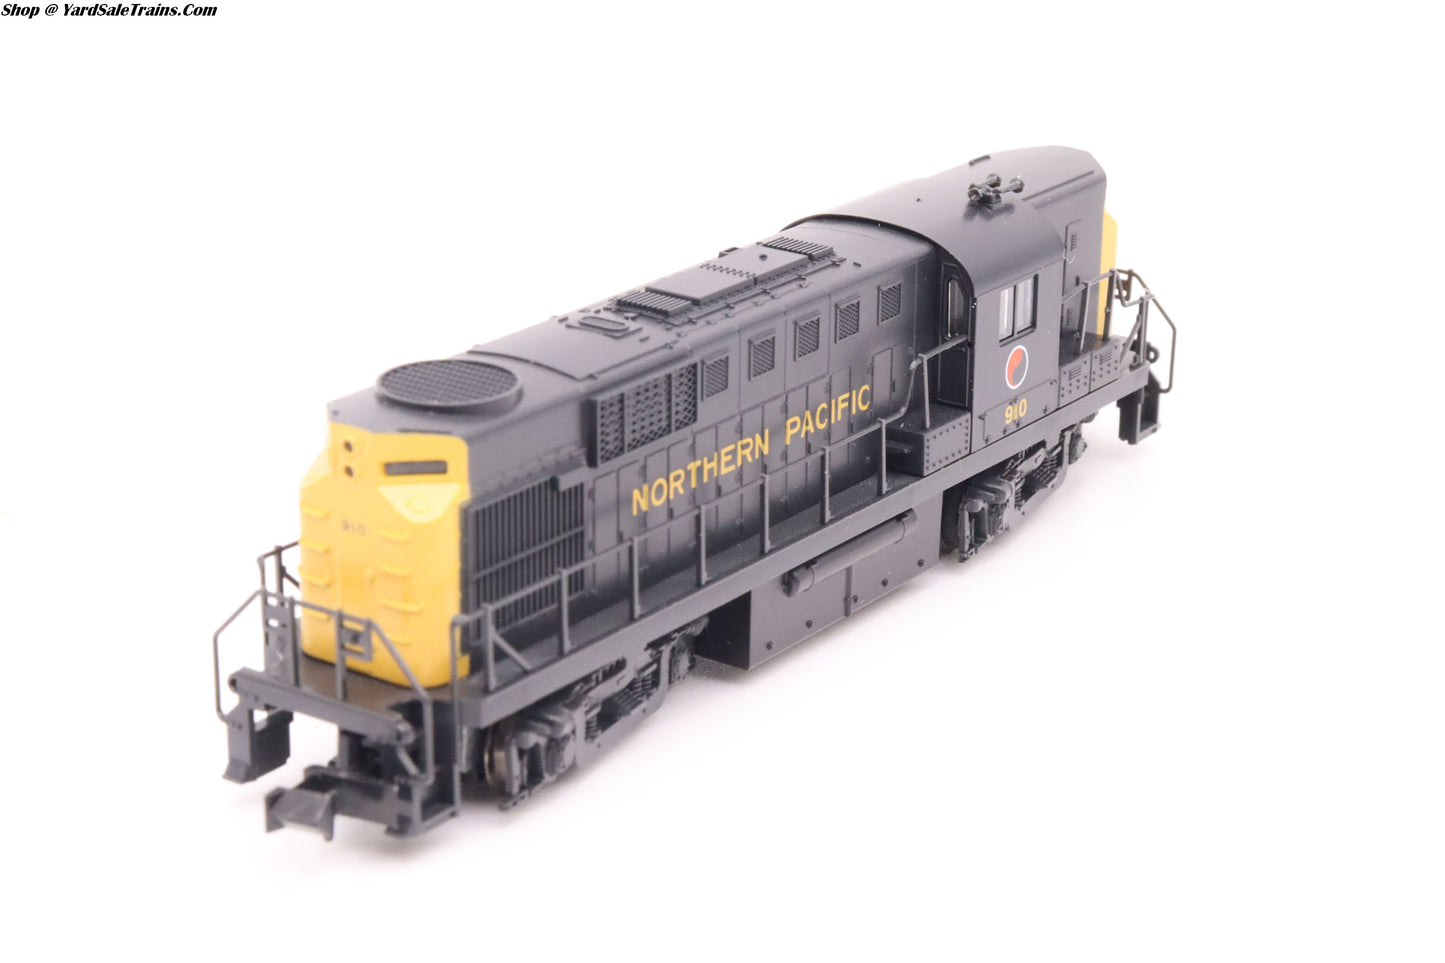 ATL-42605 - ALCO RS-11 Northern Pacific - NP #910 - Preowned